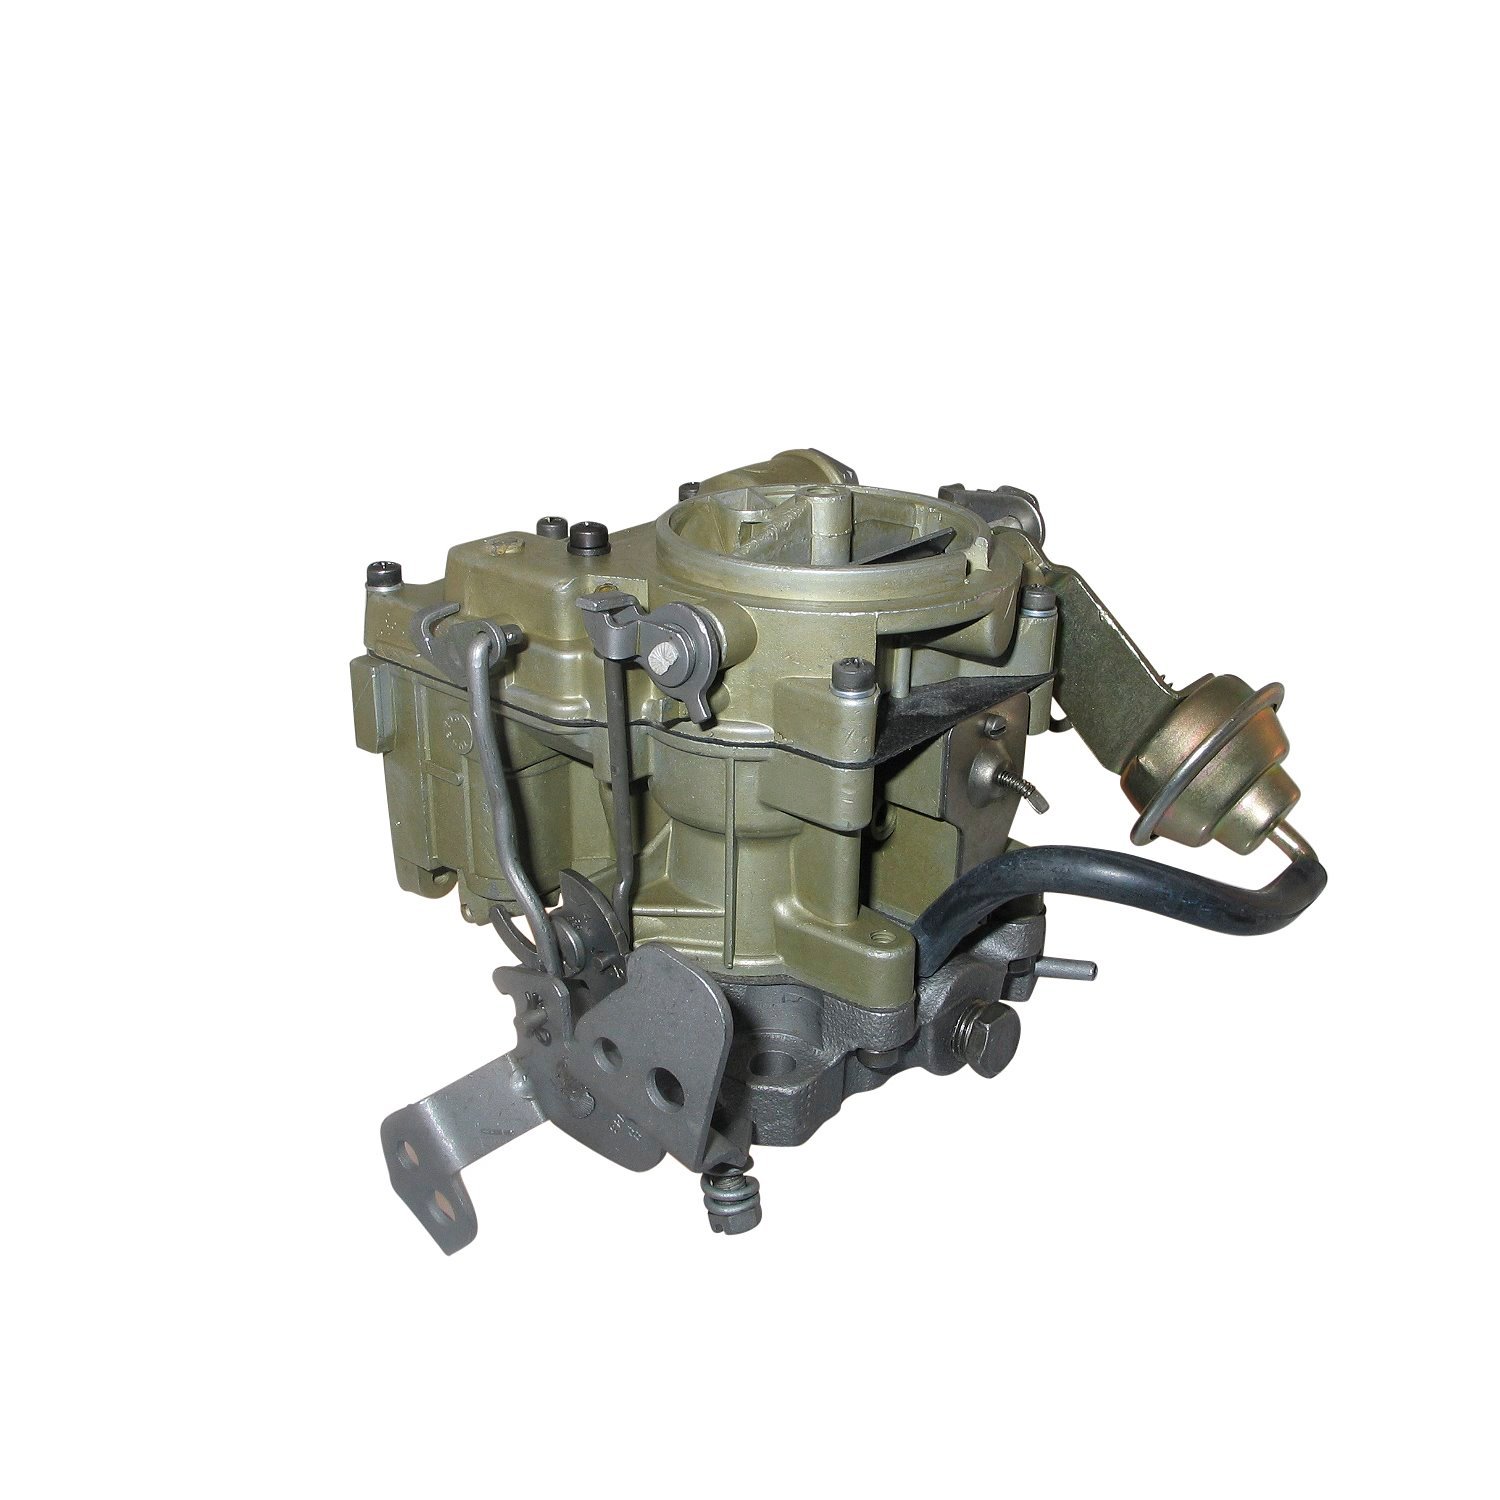 3-3285 Rochester Remanufactured Carburetor, 2GV-Style